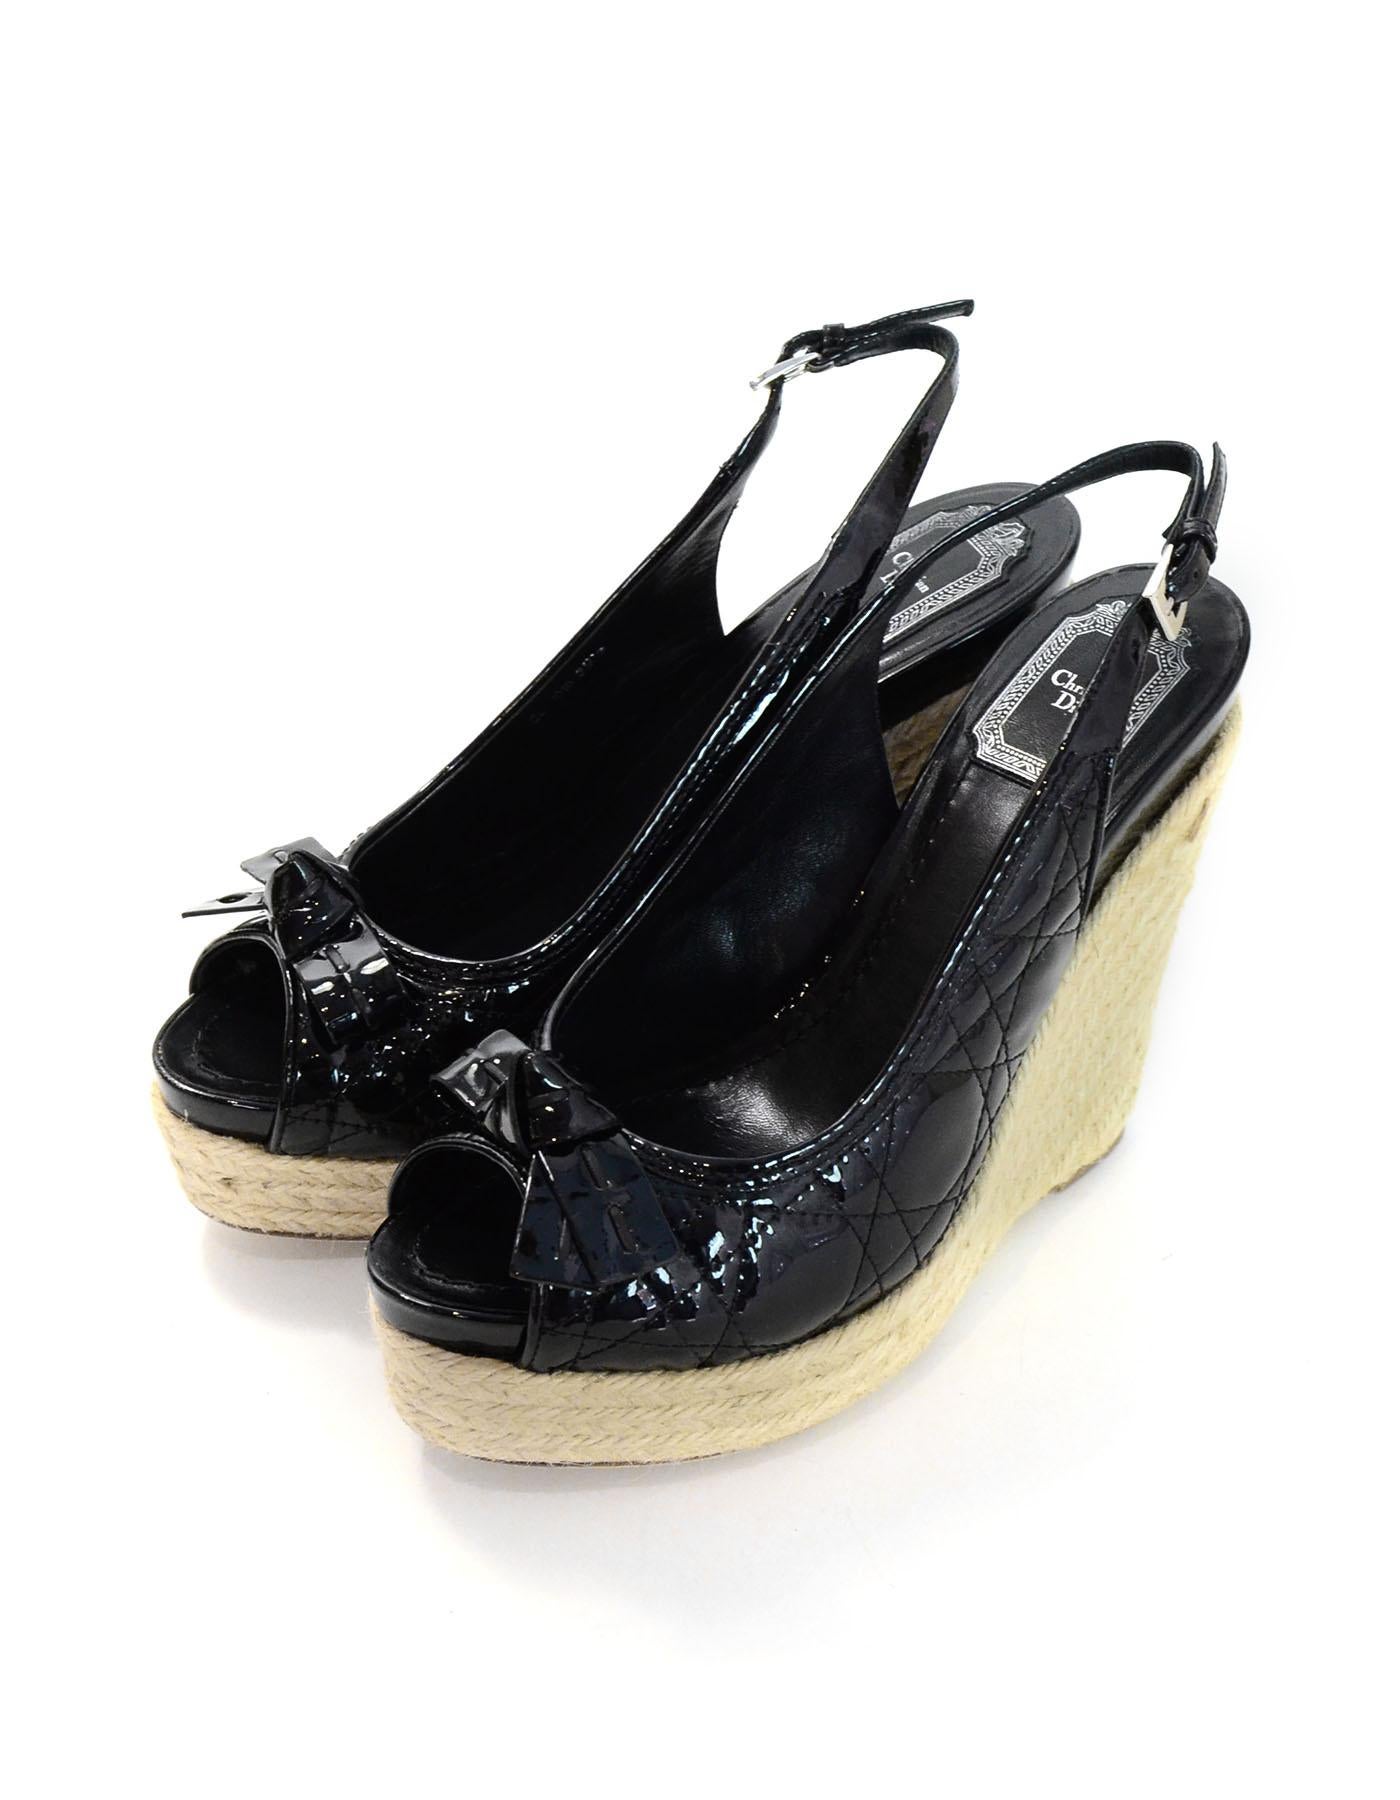 Christian Dior Black Patent Cannage Wedges Sz 39.5 NIB

Made In: Italy
Color: Black, beige
Materials: Patent leather, jute rope
Closure/Opening: Slingback strap with buckle
Sole Stamp: Dior made in Italy 39.5
Overall Condition: Excellent pre-owned